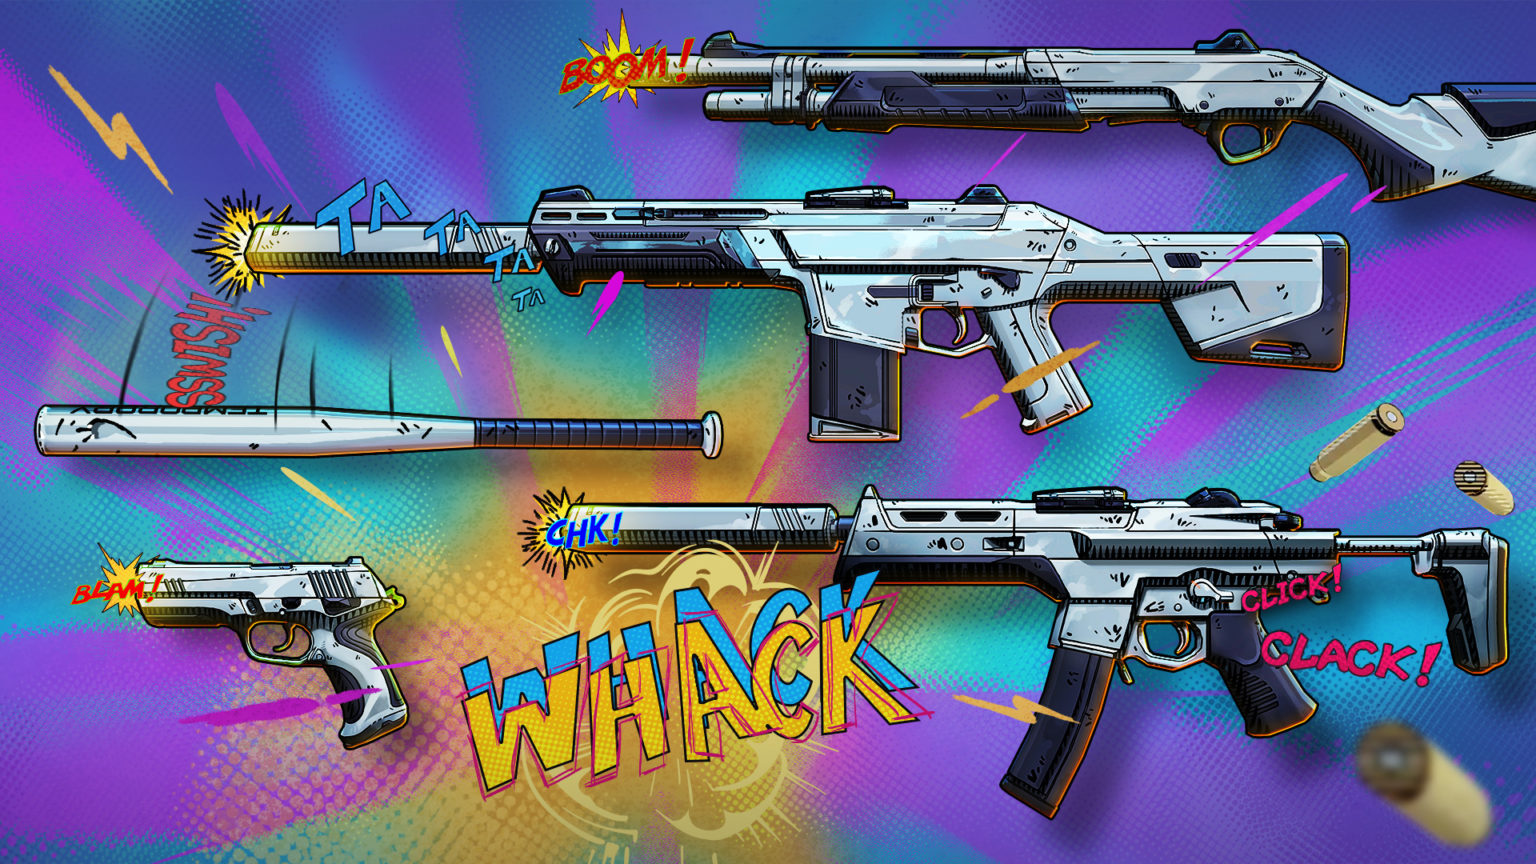 radiant crisis 001 weapon skins add comic book style to valorant